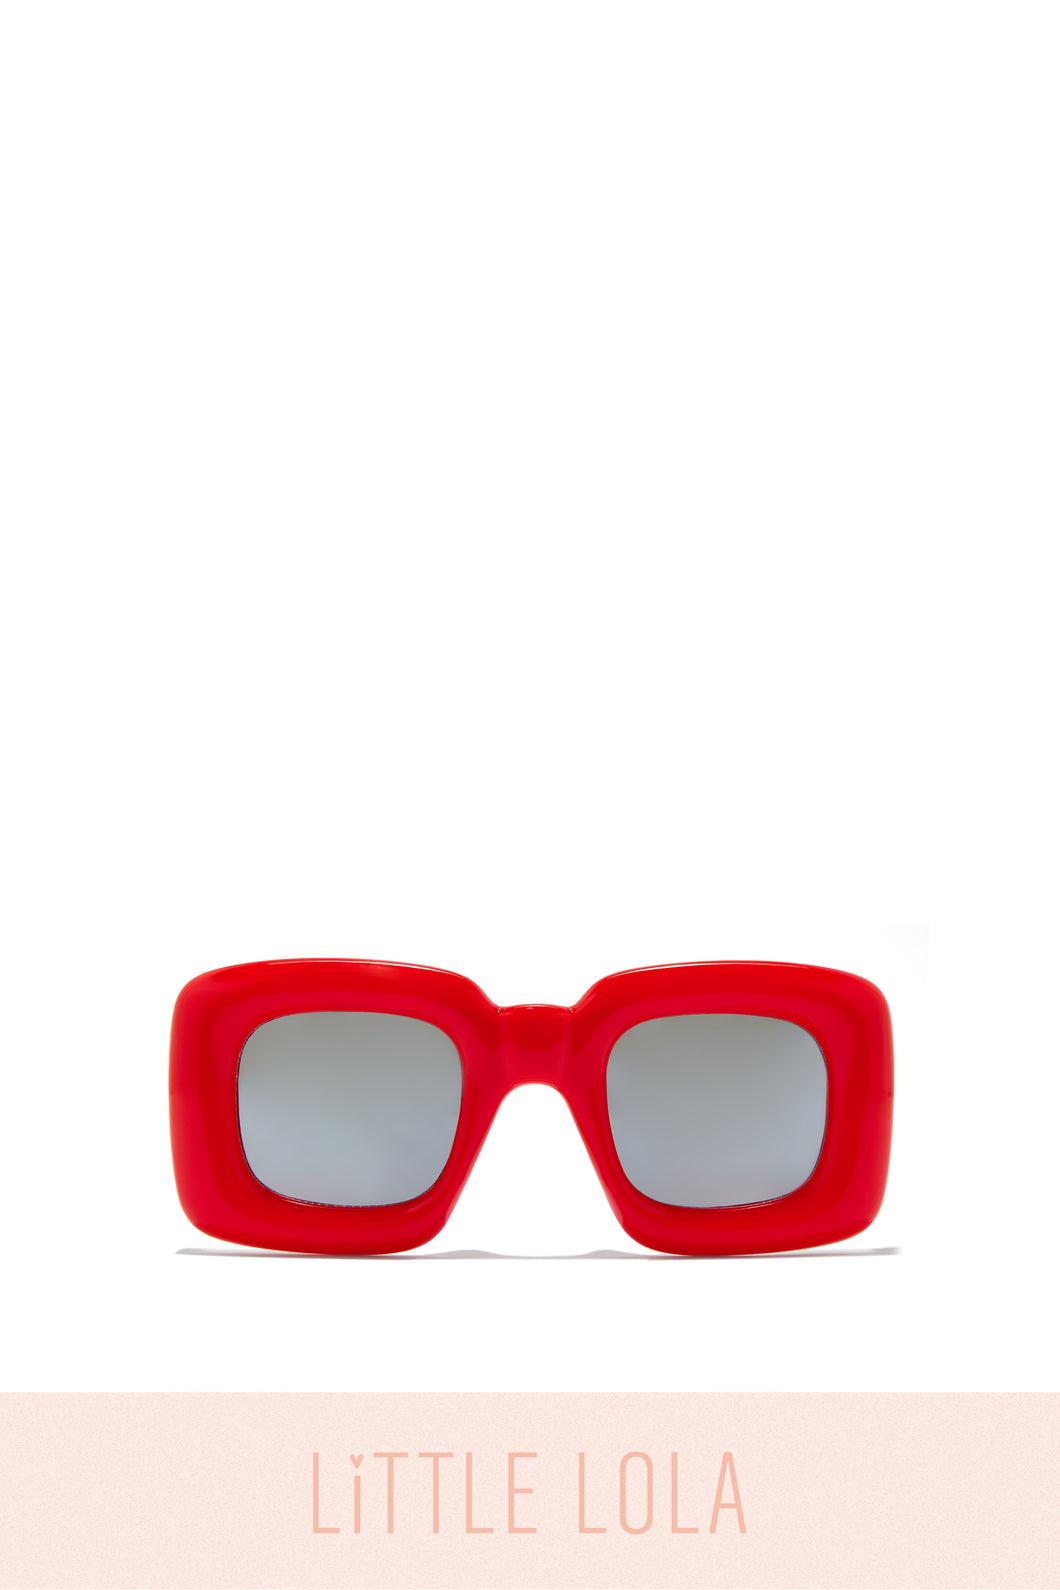 Little Lola Red Sunglasses With Gray Lenses